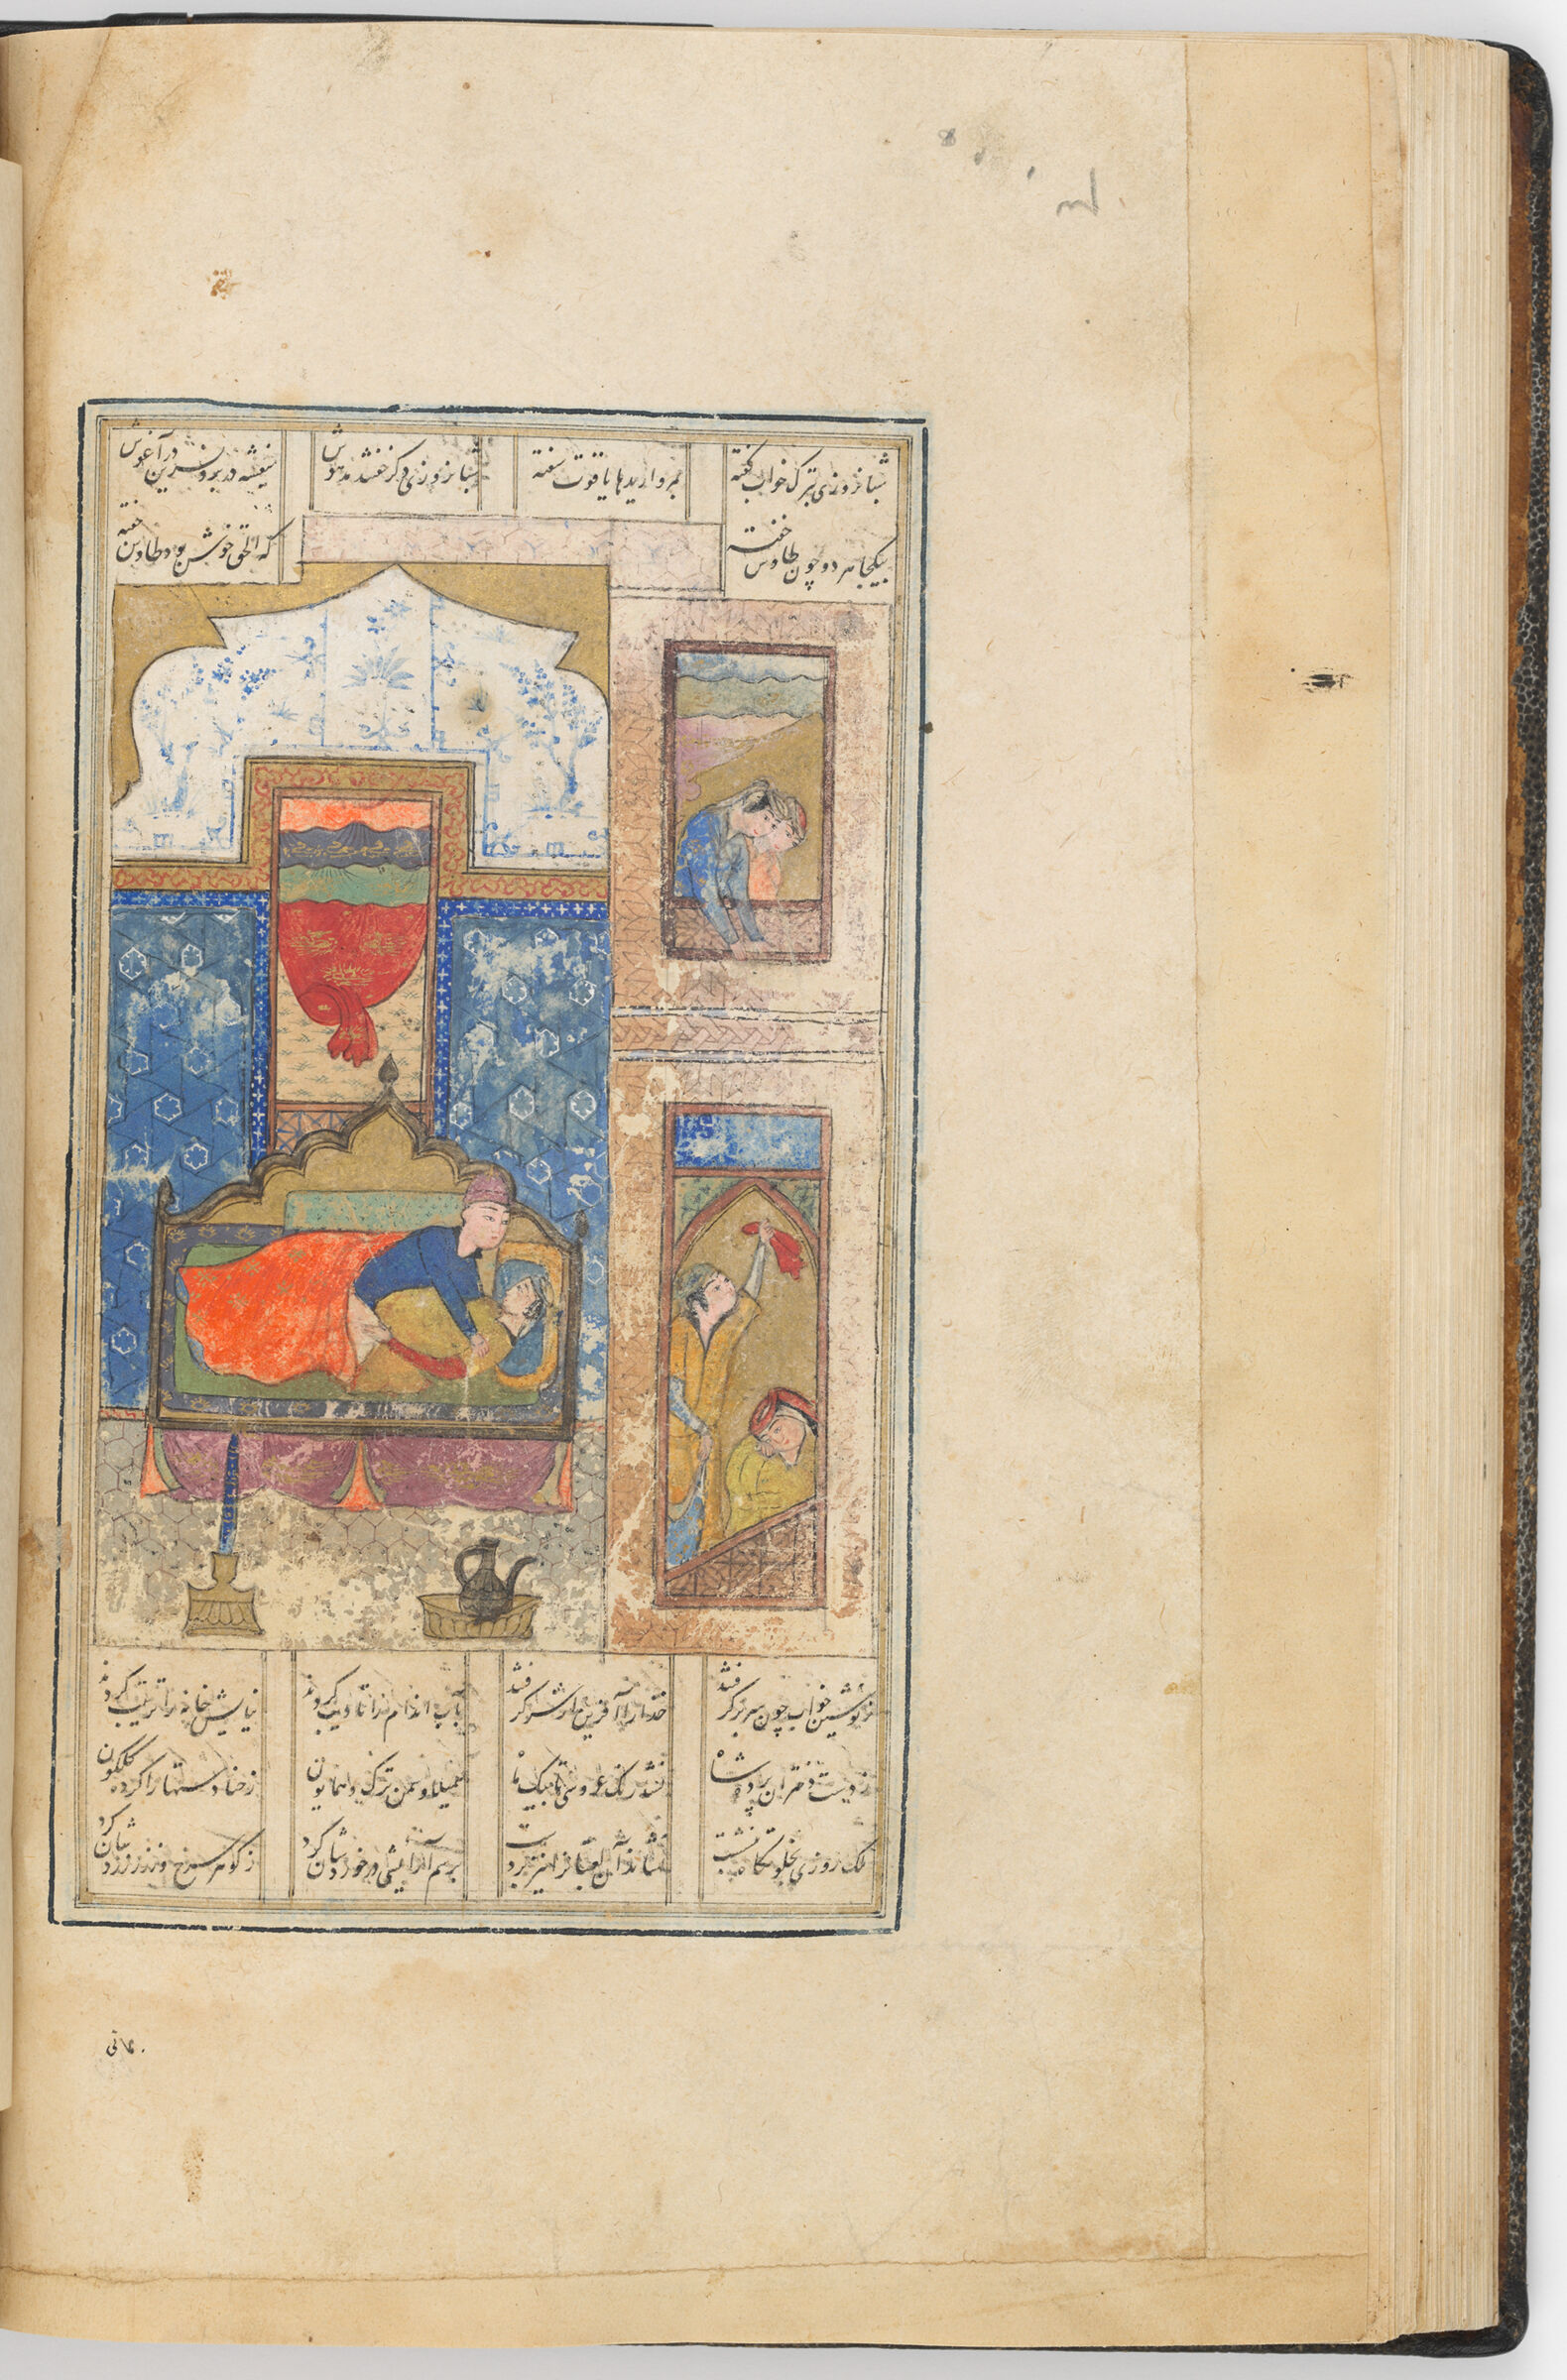 Khusraw And Shirin Making Love (Text Recto; Painting Verso Of Folio 104), Painting From A Manuscript Of The Khamsa By Nizami